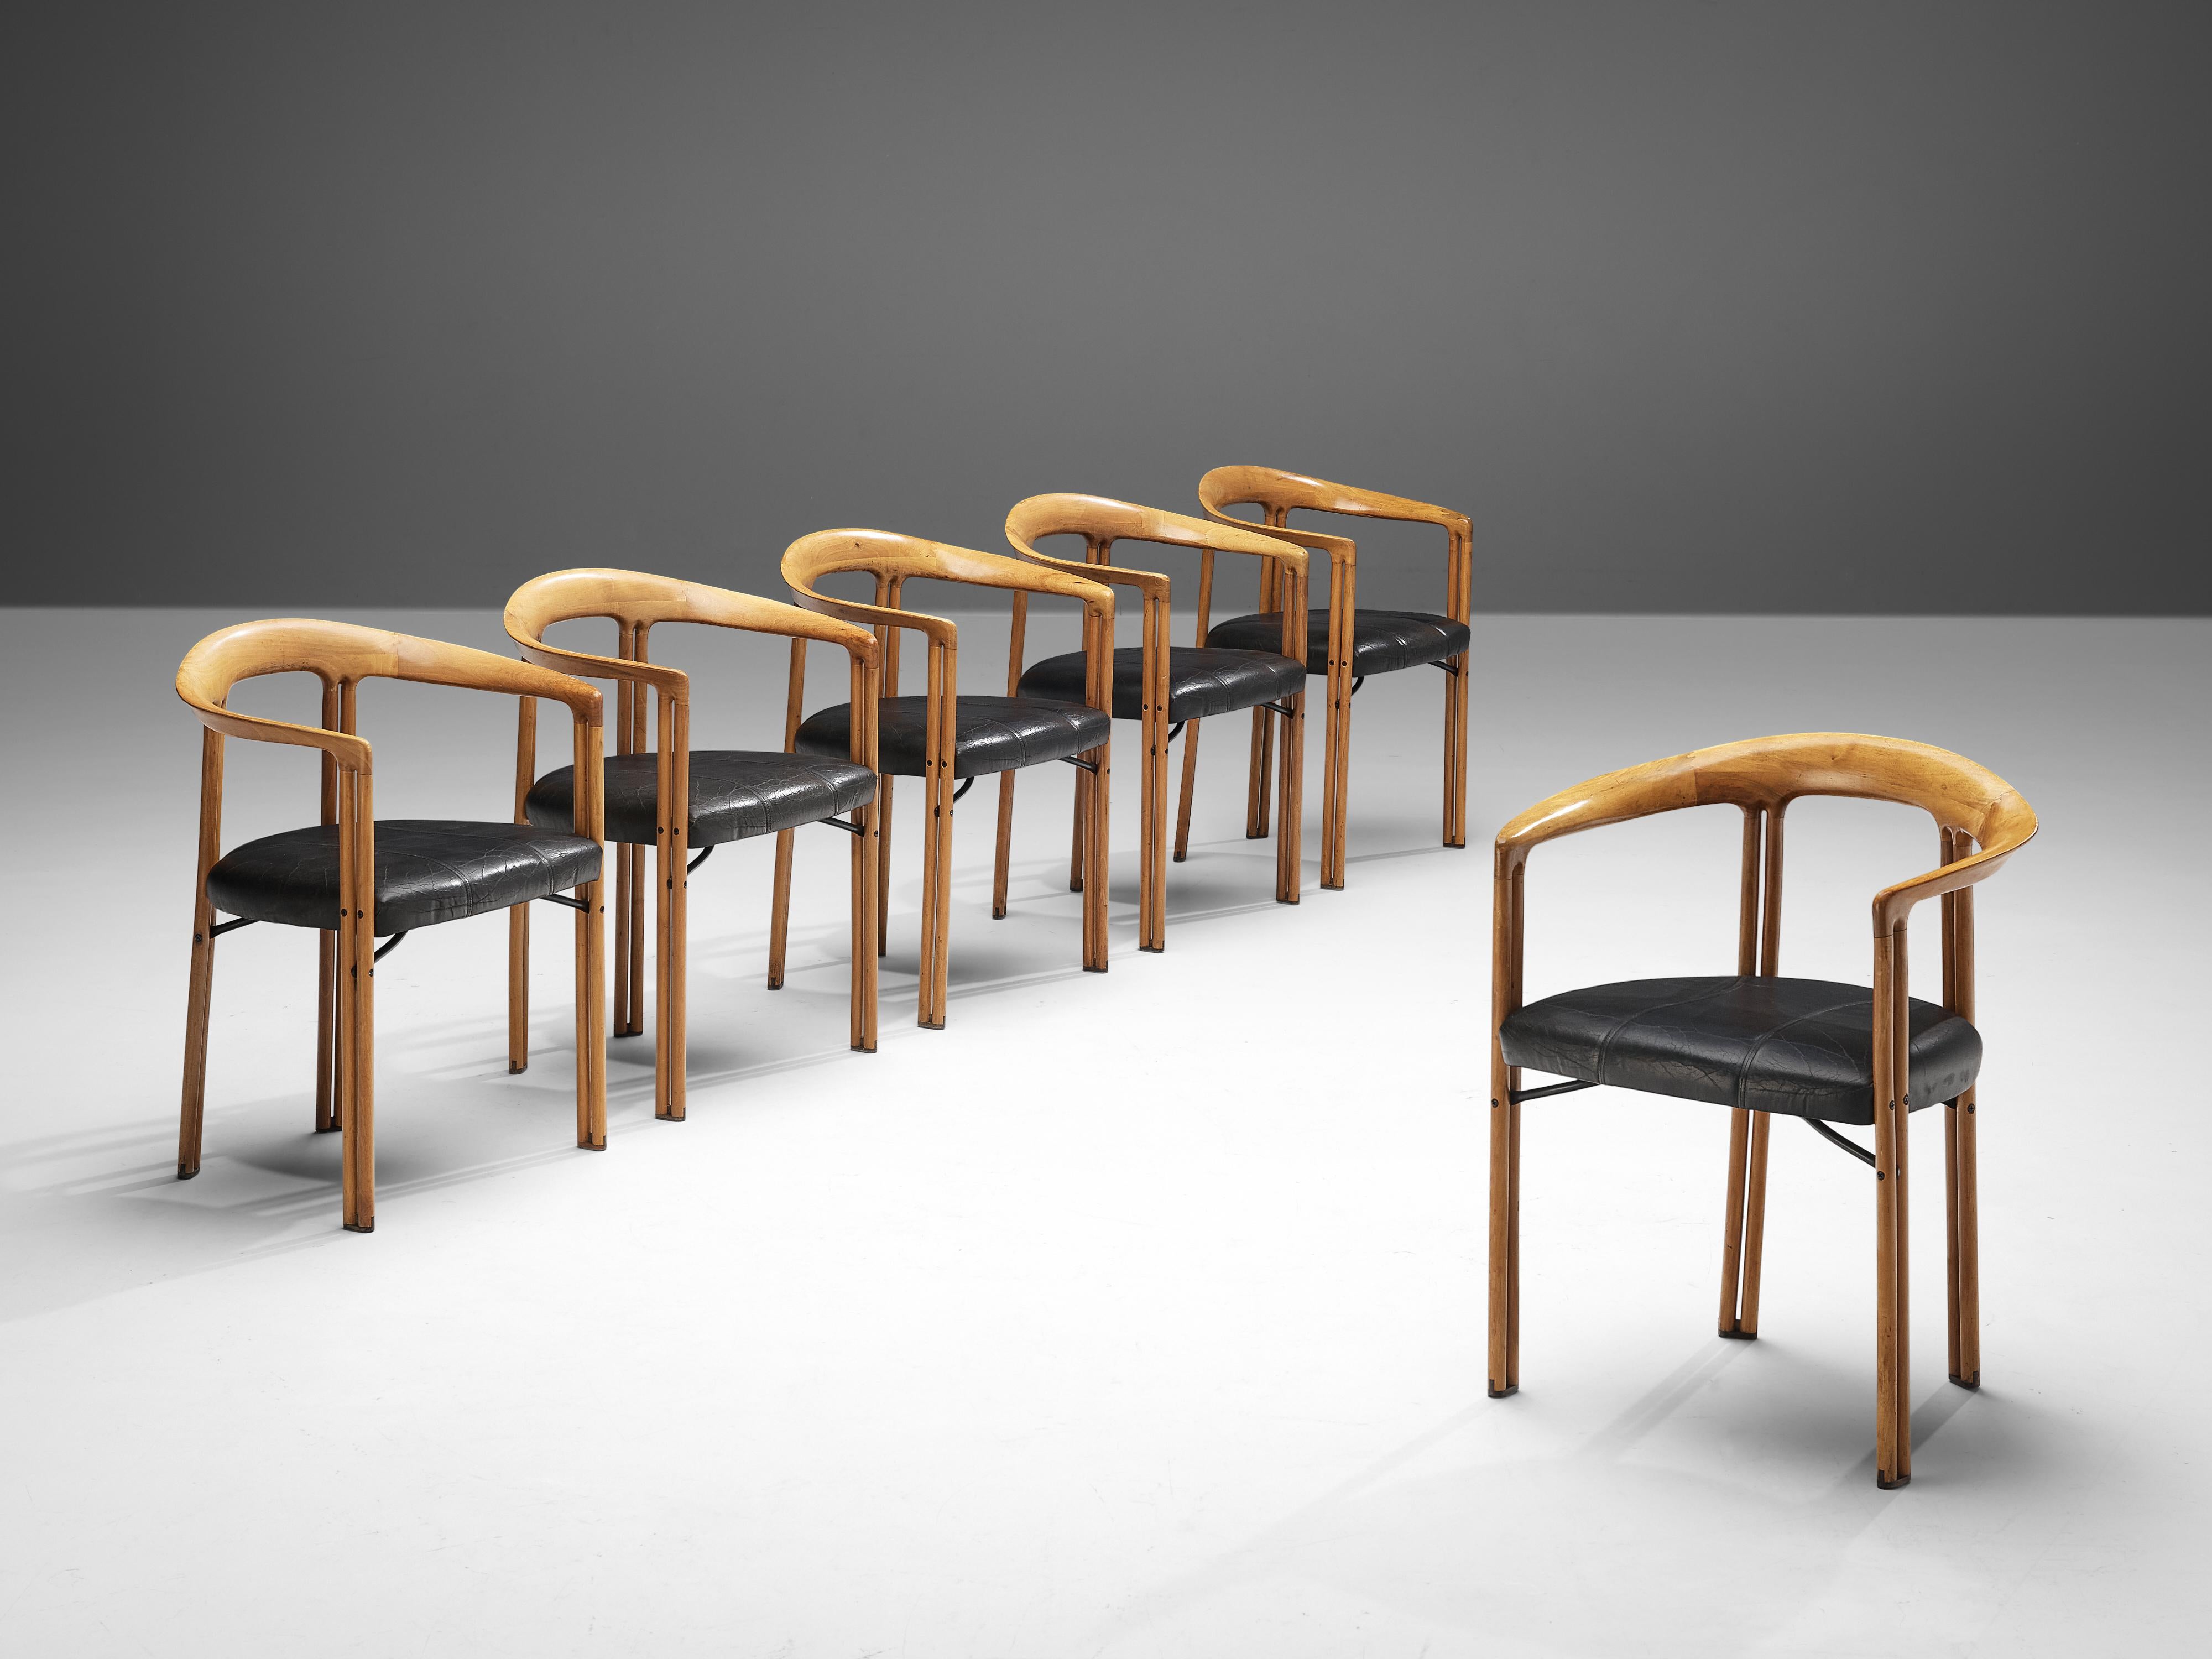 Franco Poli for Bernini, 'Ulna' dining chairs, walnut, leather, Italy, 1986.

7 collection Morentz + 3 additional chairs